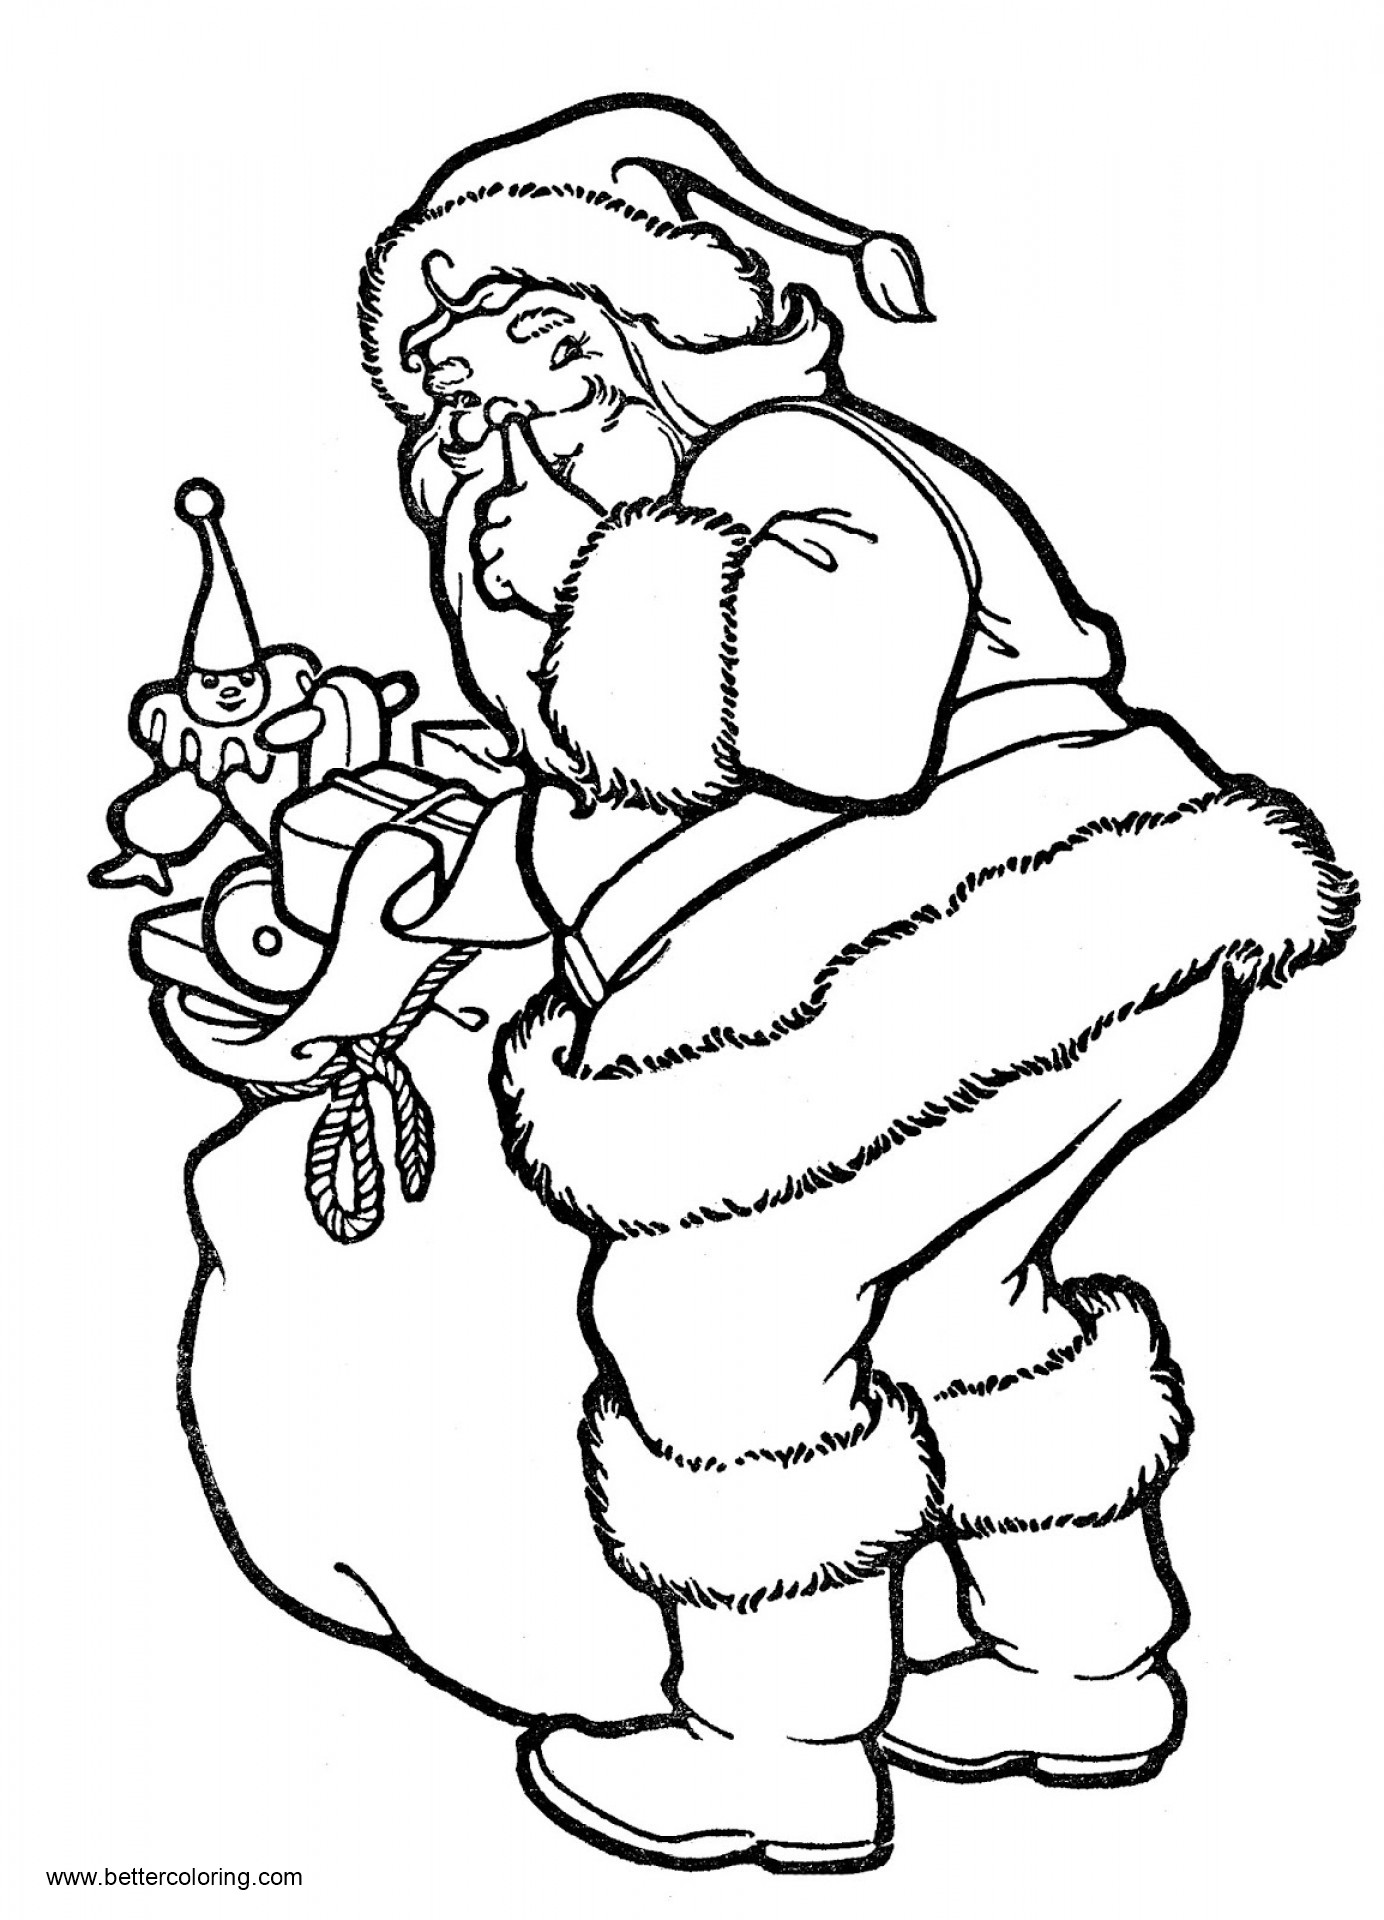 Christmas Coloring Pages Cute Santa With Toys - Free ...